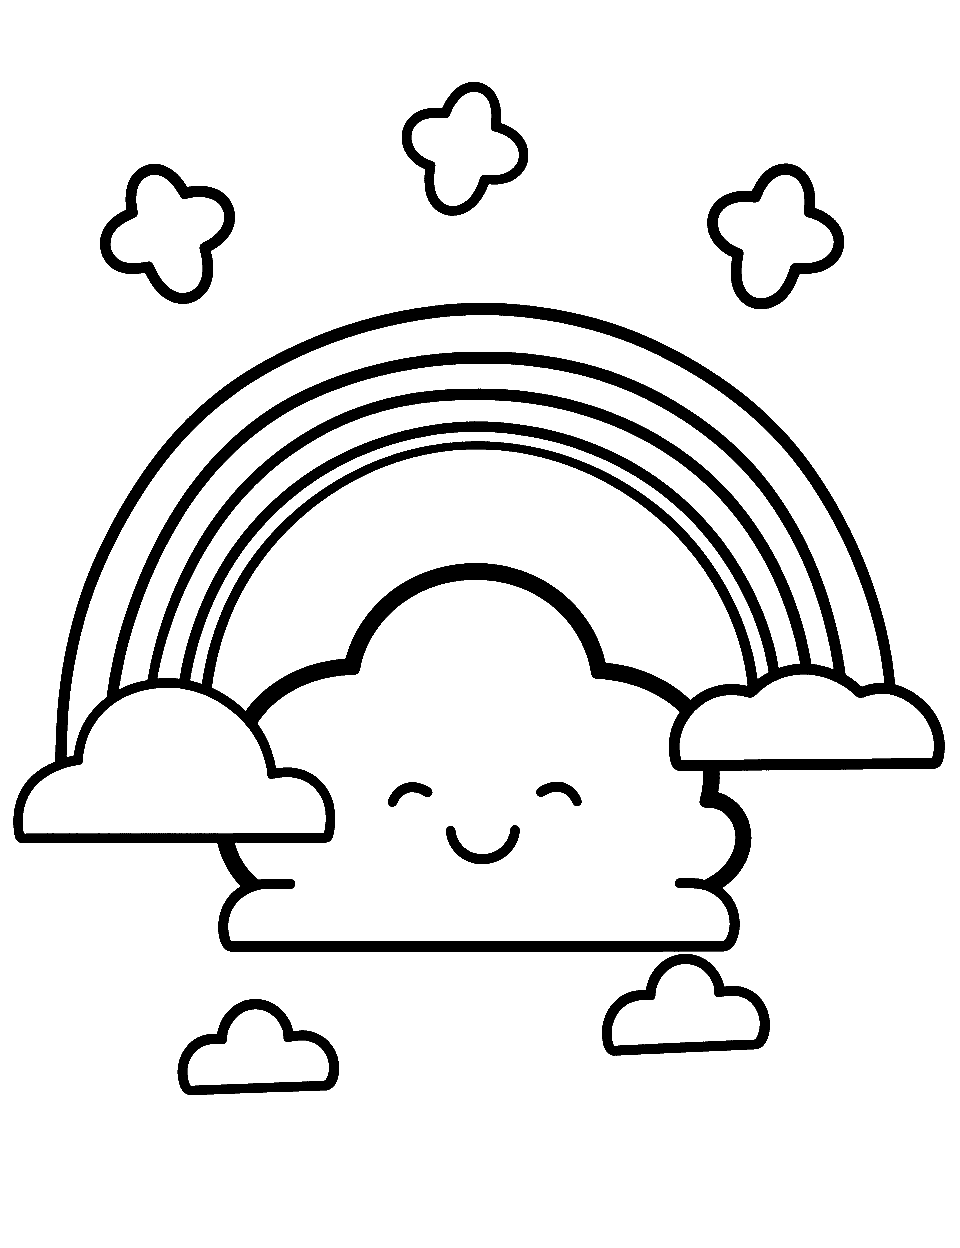 Kawaii Rainbow Coloring Page - A Kawaii-inspired rainbow with adorable facial expressions for preschool kids.